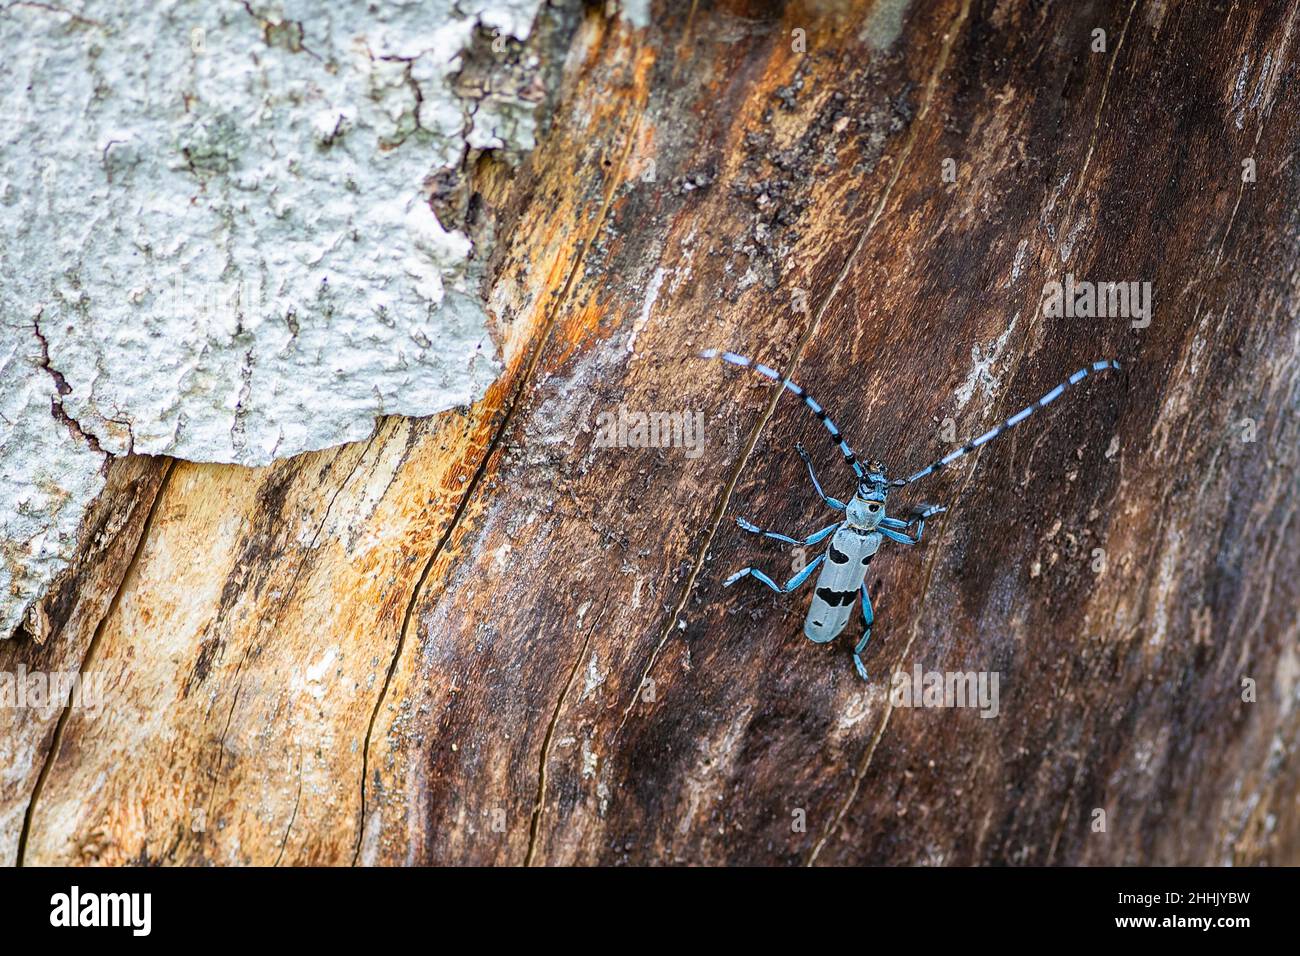 The Alpine Longicorn, a blue beetle with black spots, climbing up a beech tree with brown wood and grey bark. Stock Photo